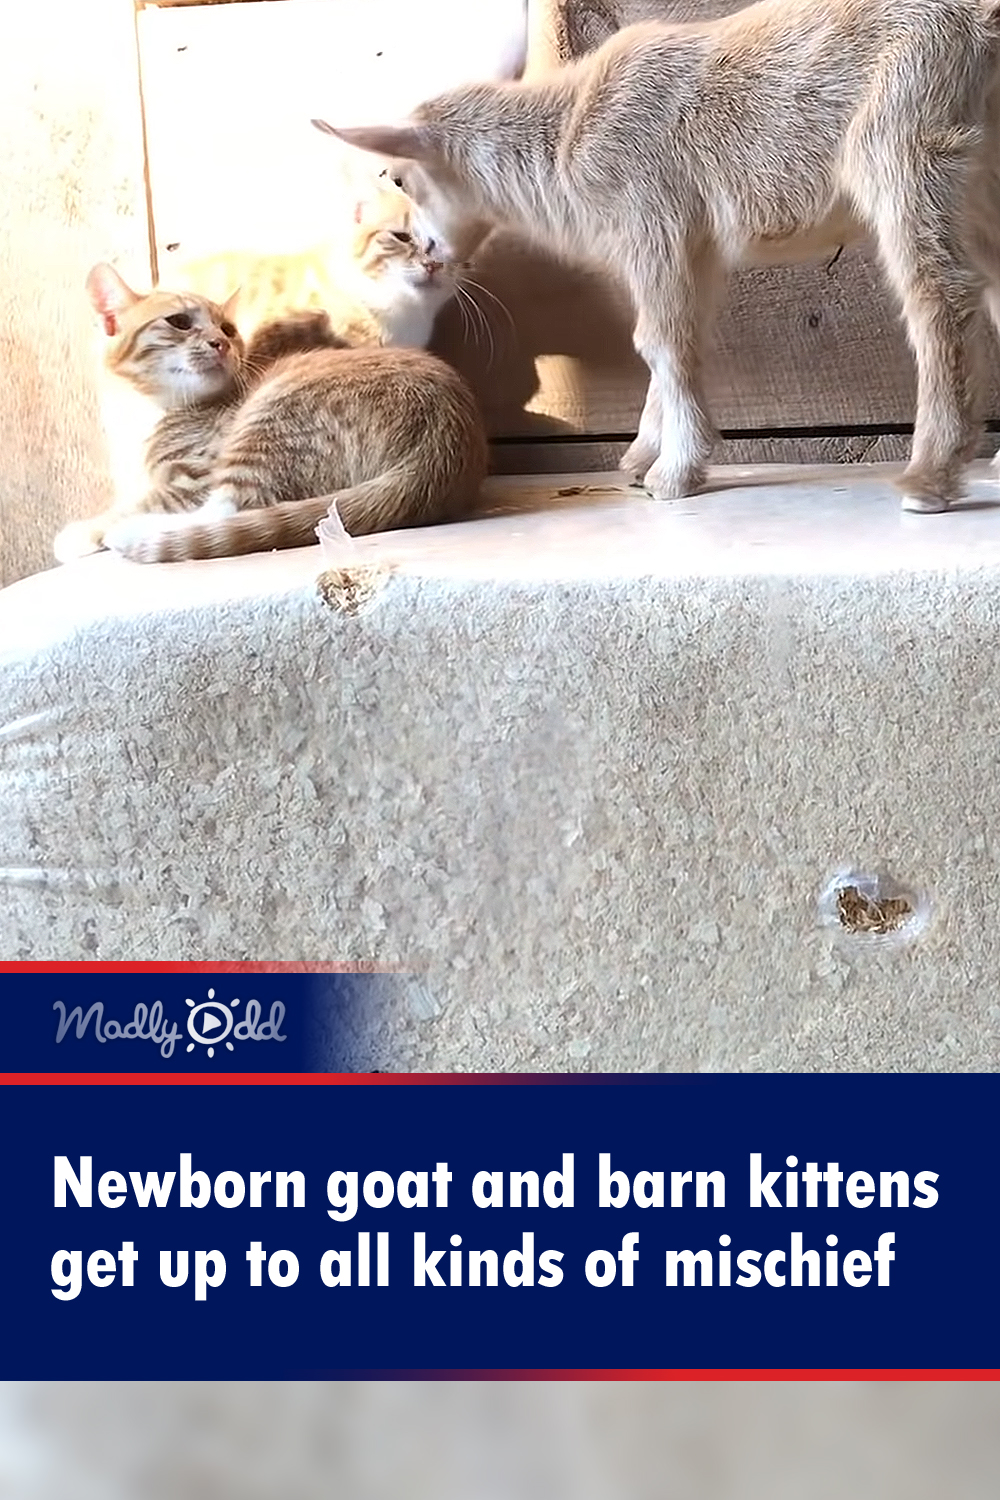 Newborn goat and barn kittens get up to all kinds of mischief